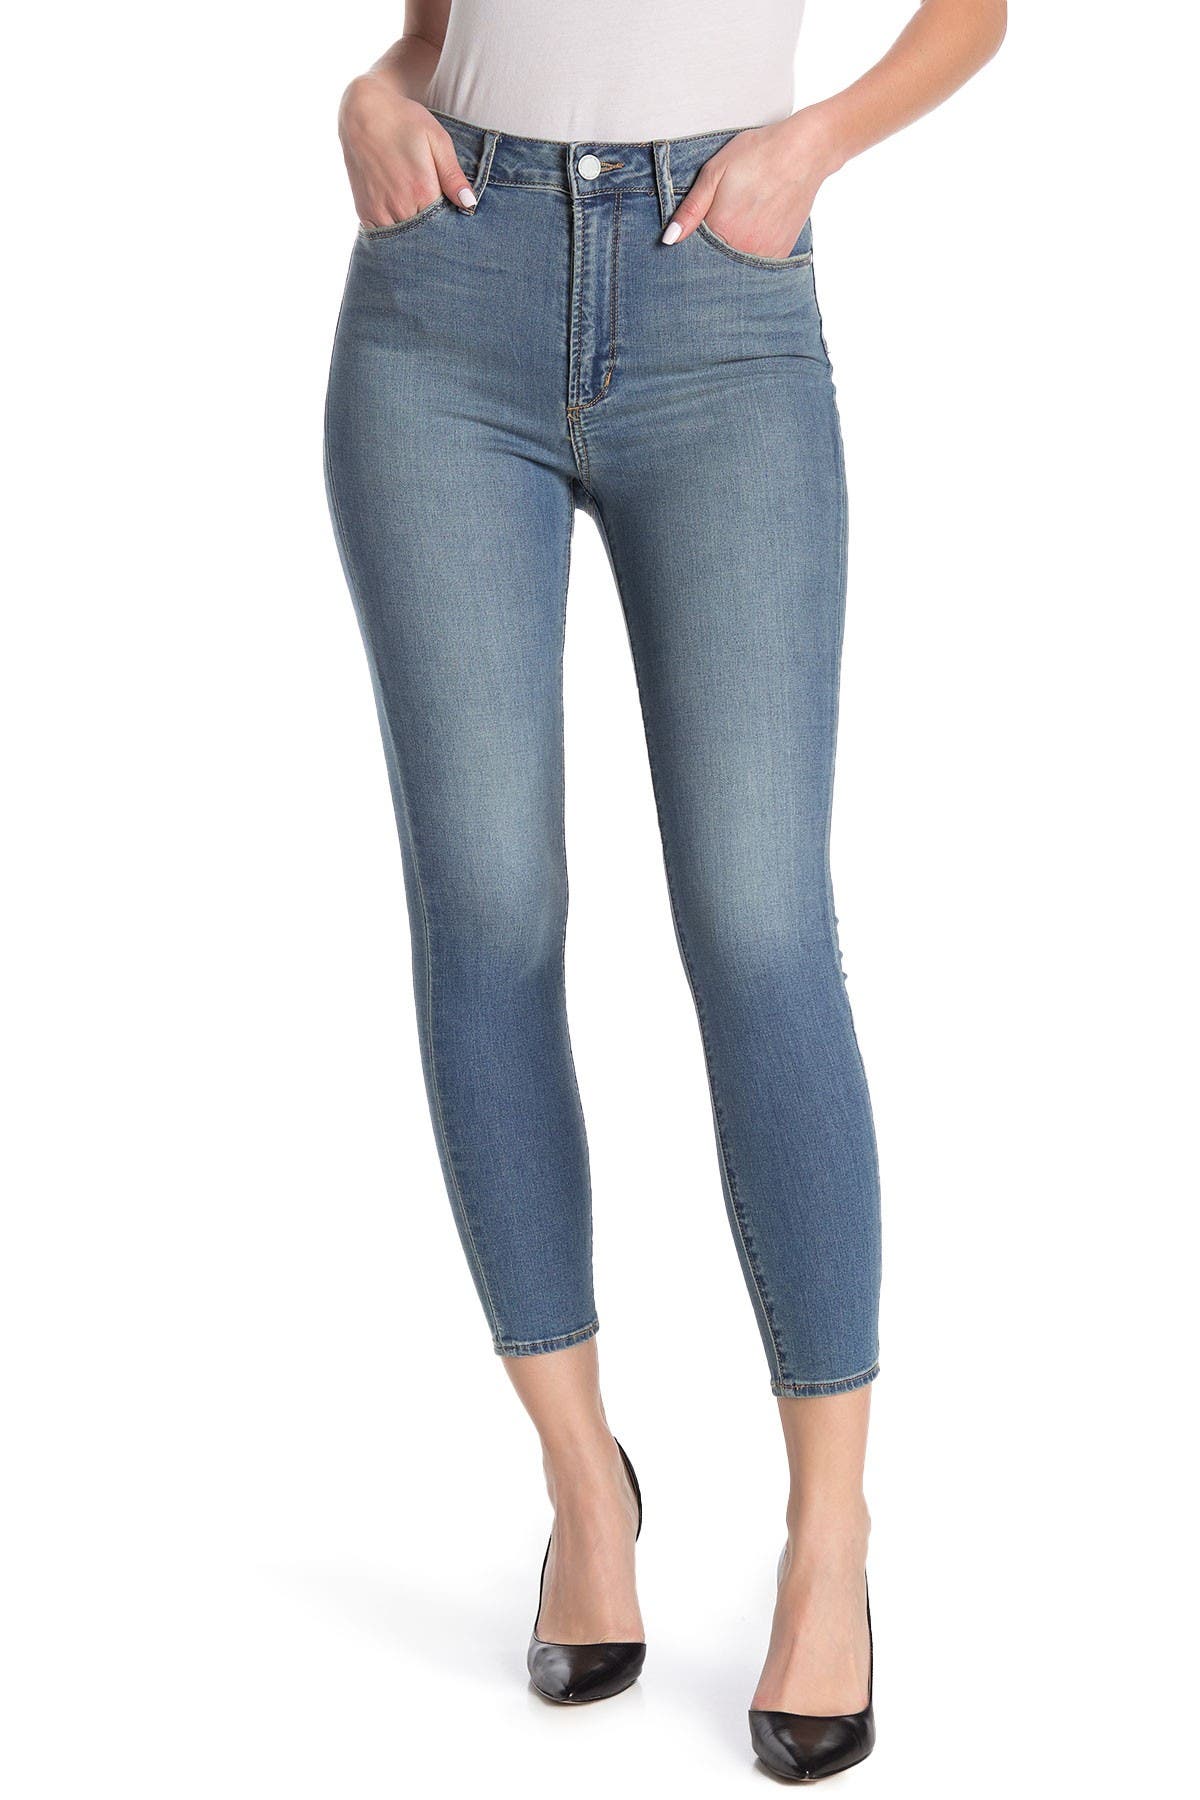 articles of society jeans nordstrom